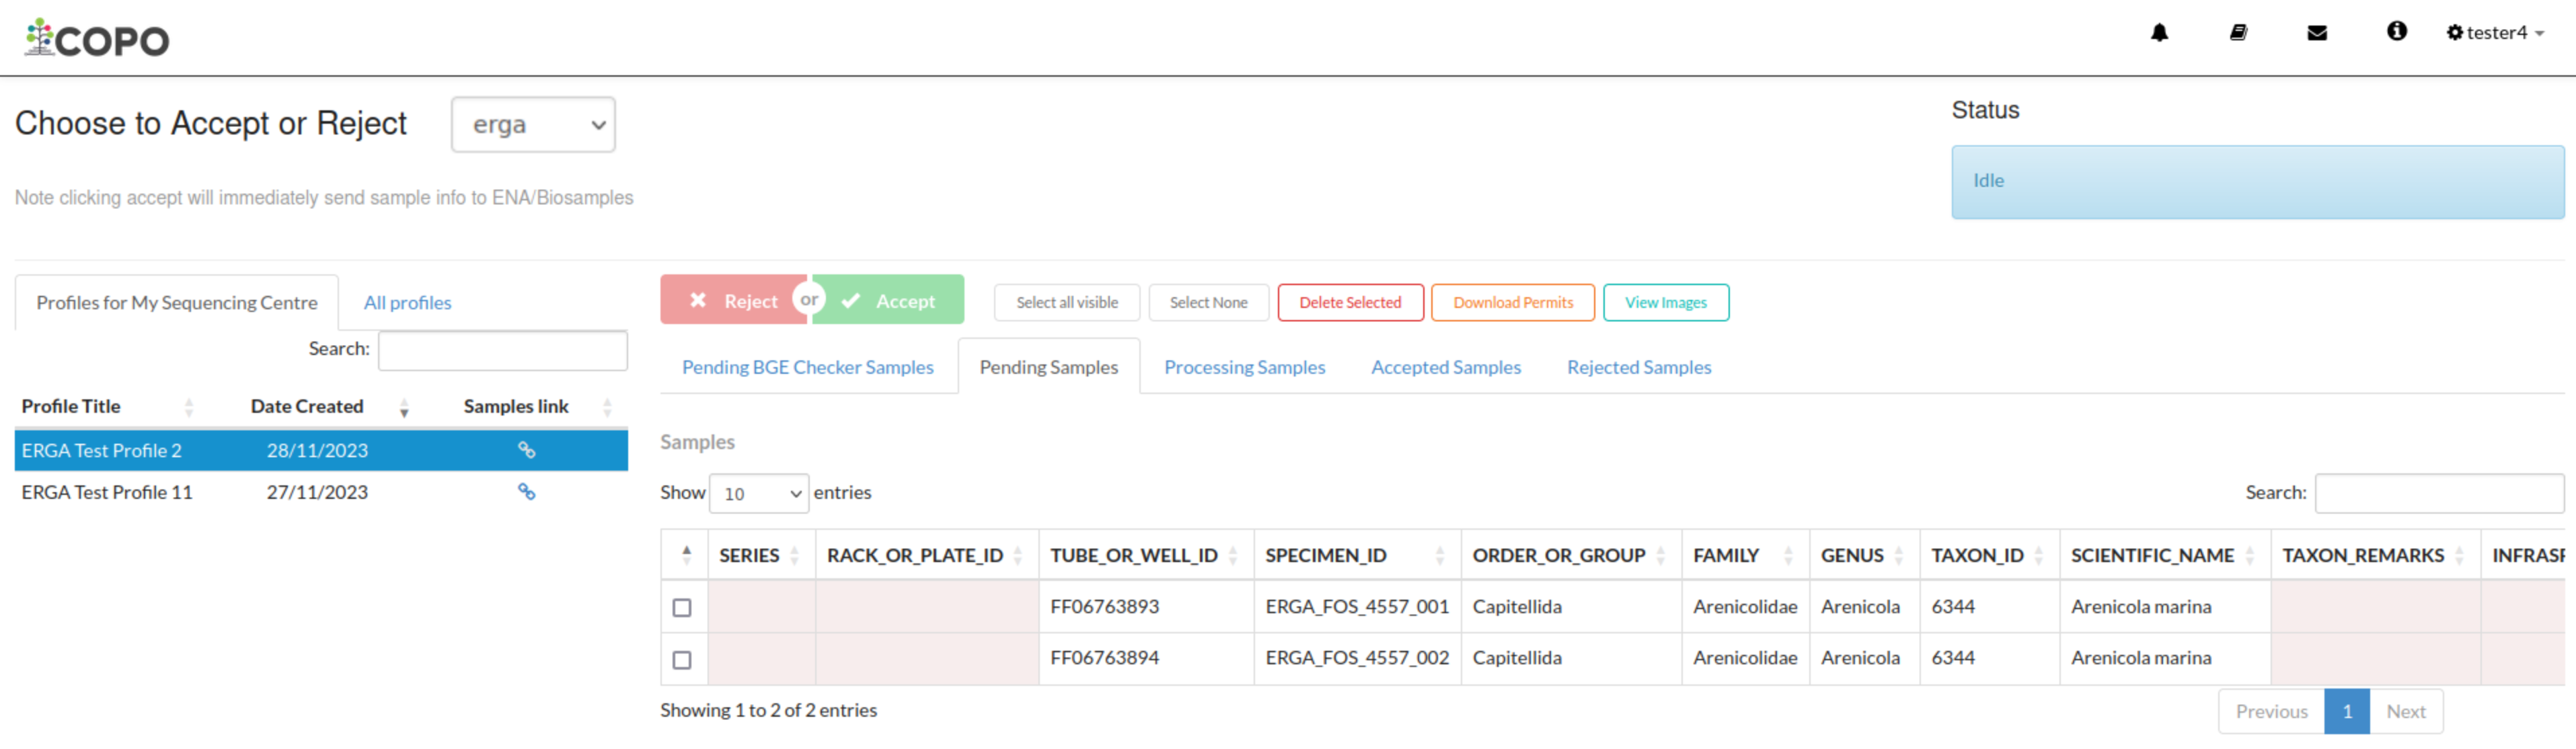 Accepted samples on the 'Accept or Reject Samples' web page for ERGA profiles are displayed in in 'Pending Samples' tab